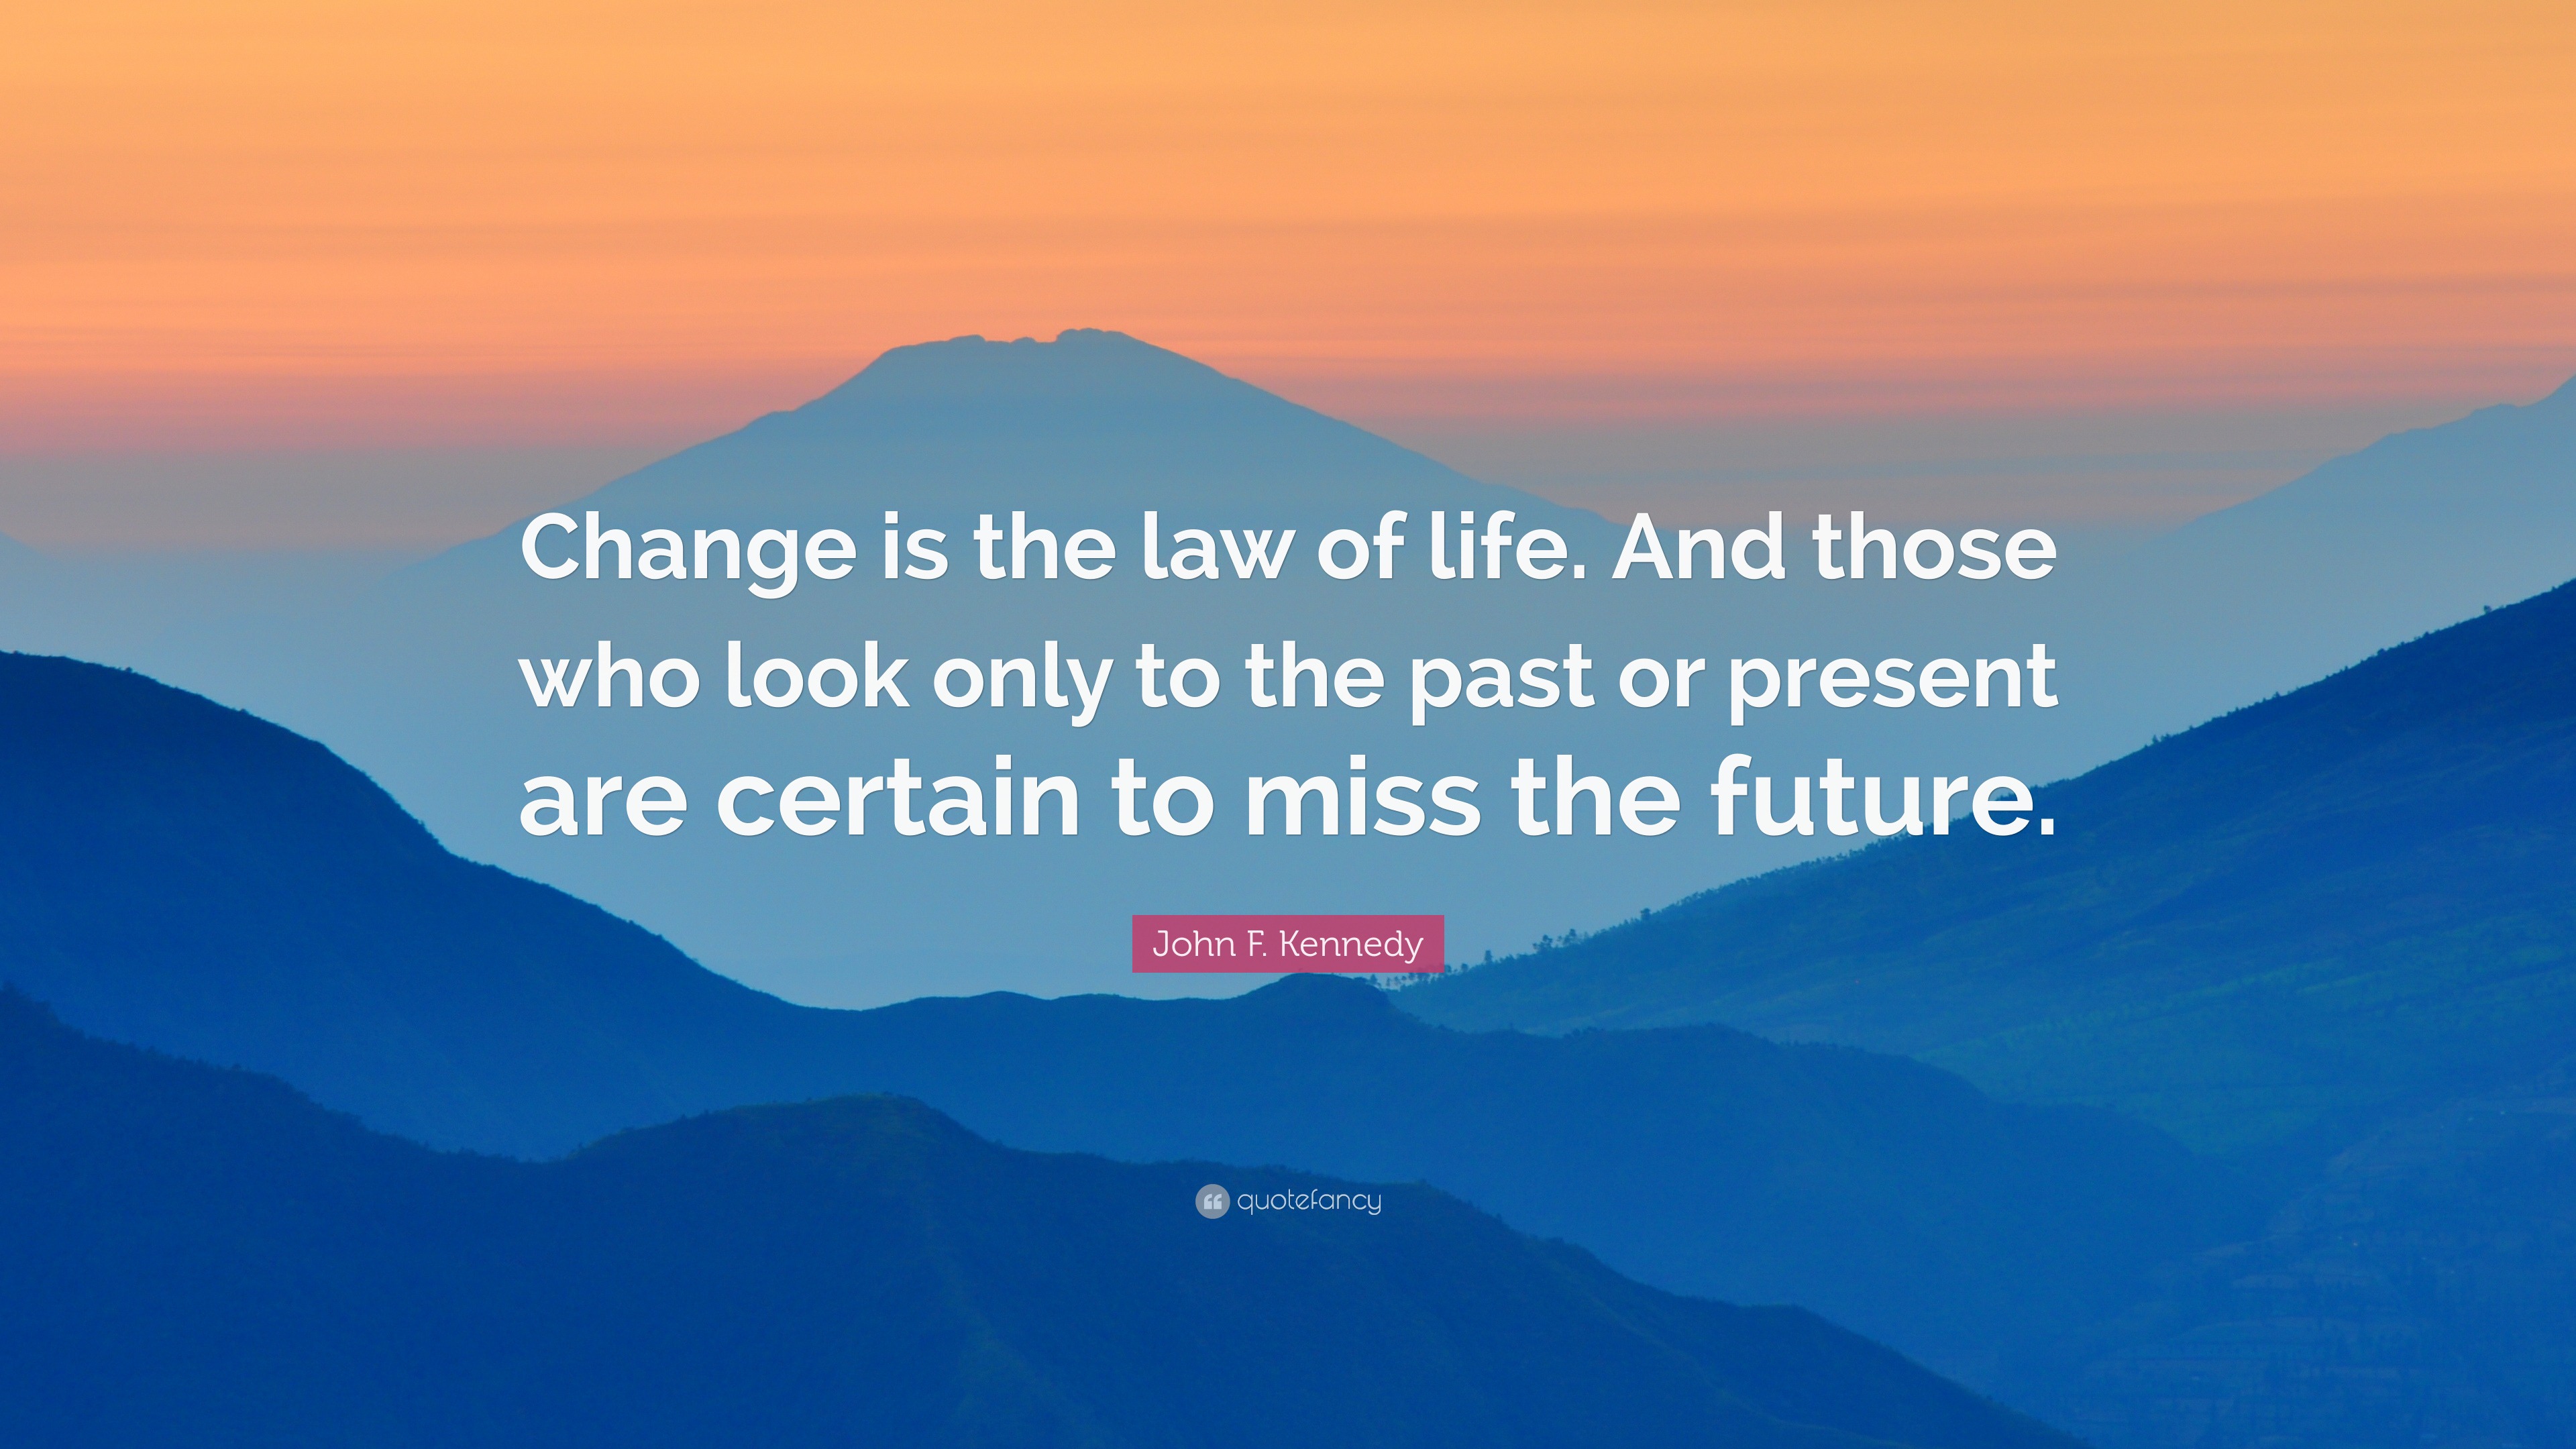 quotes about life changes